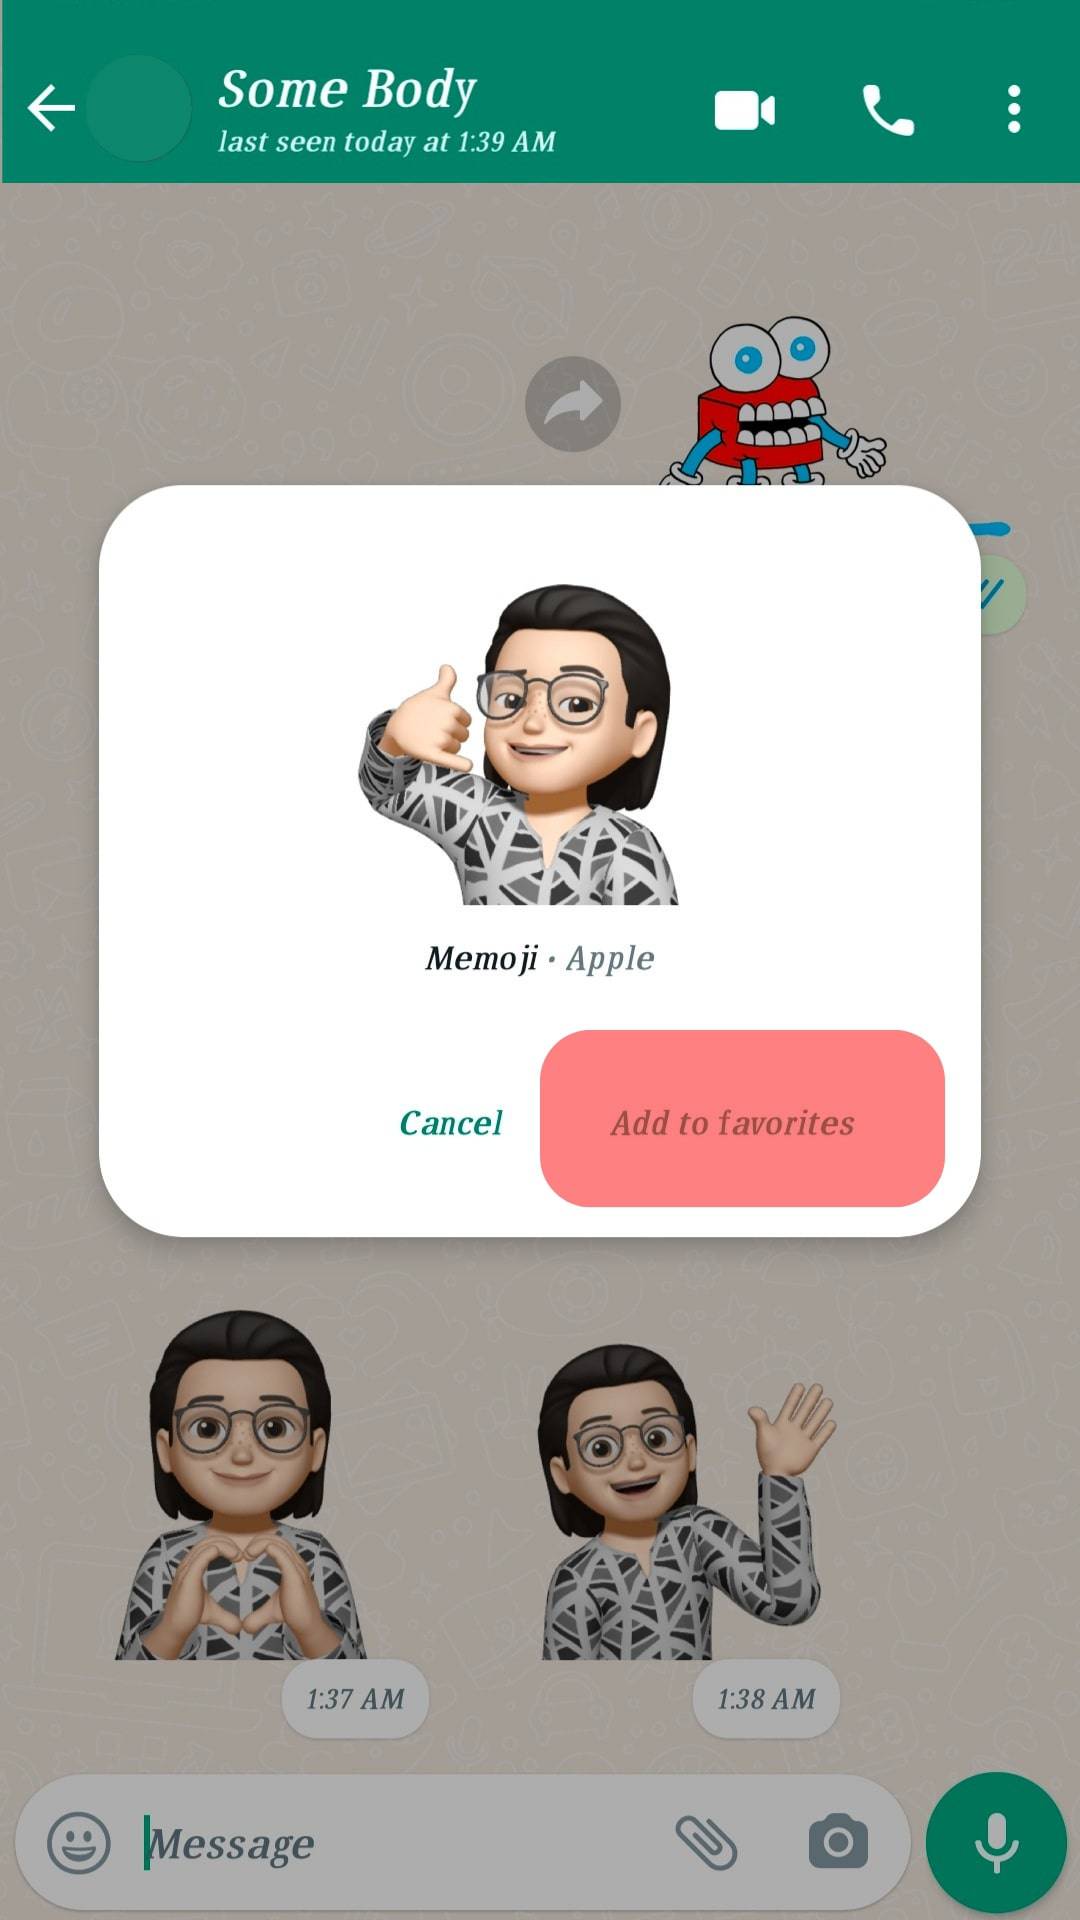 Repeat The Above Process For All Memojis You Want To Save.